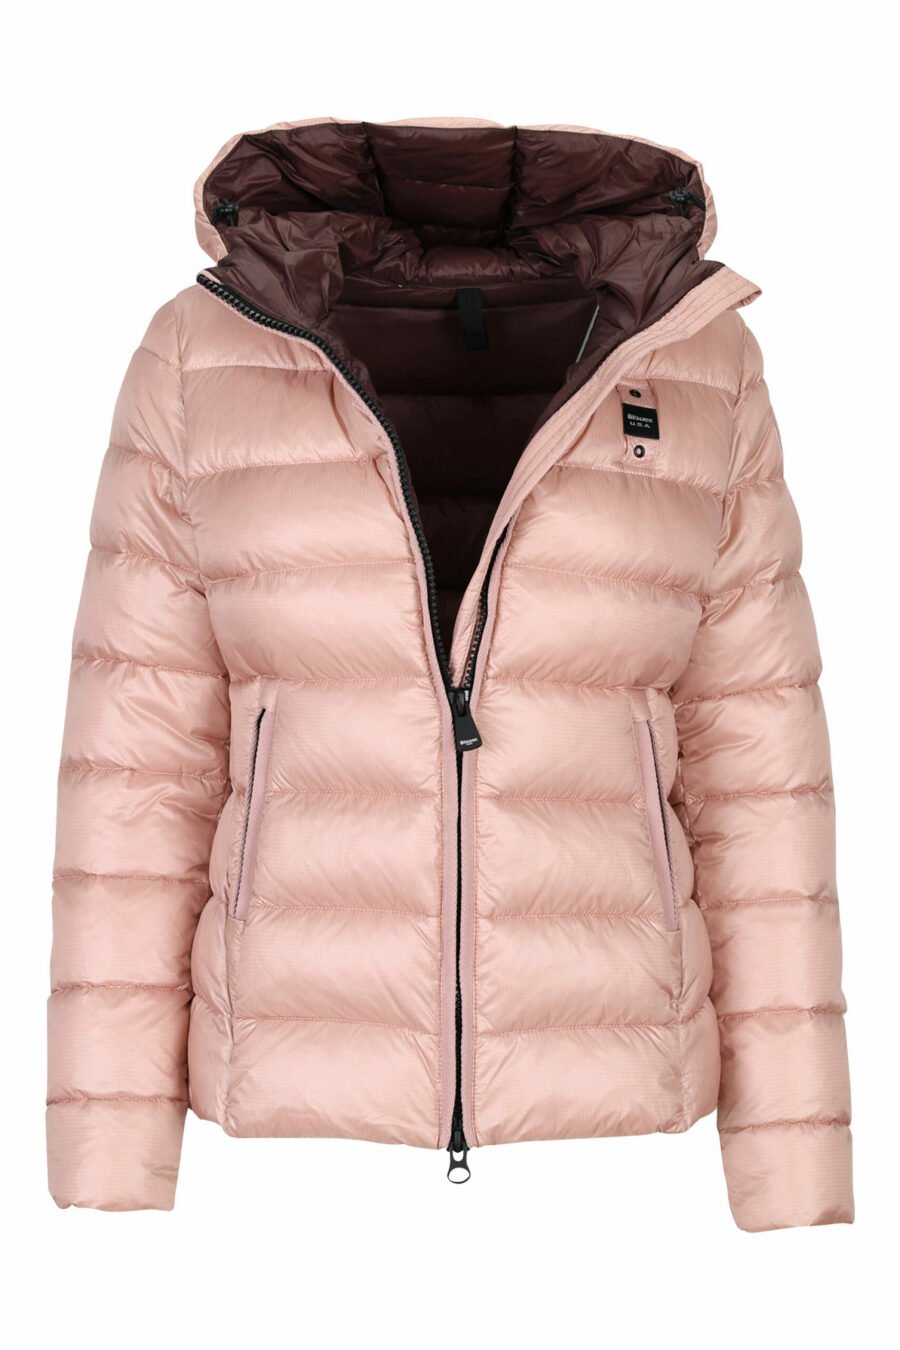 Pale pink straight lined hooded jacket with purple inside with logo patch - 8058610675660 1 scaled